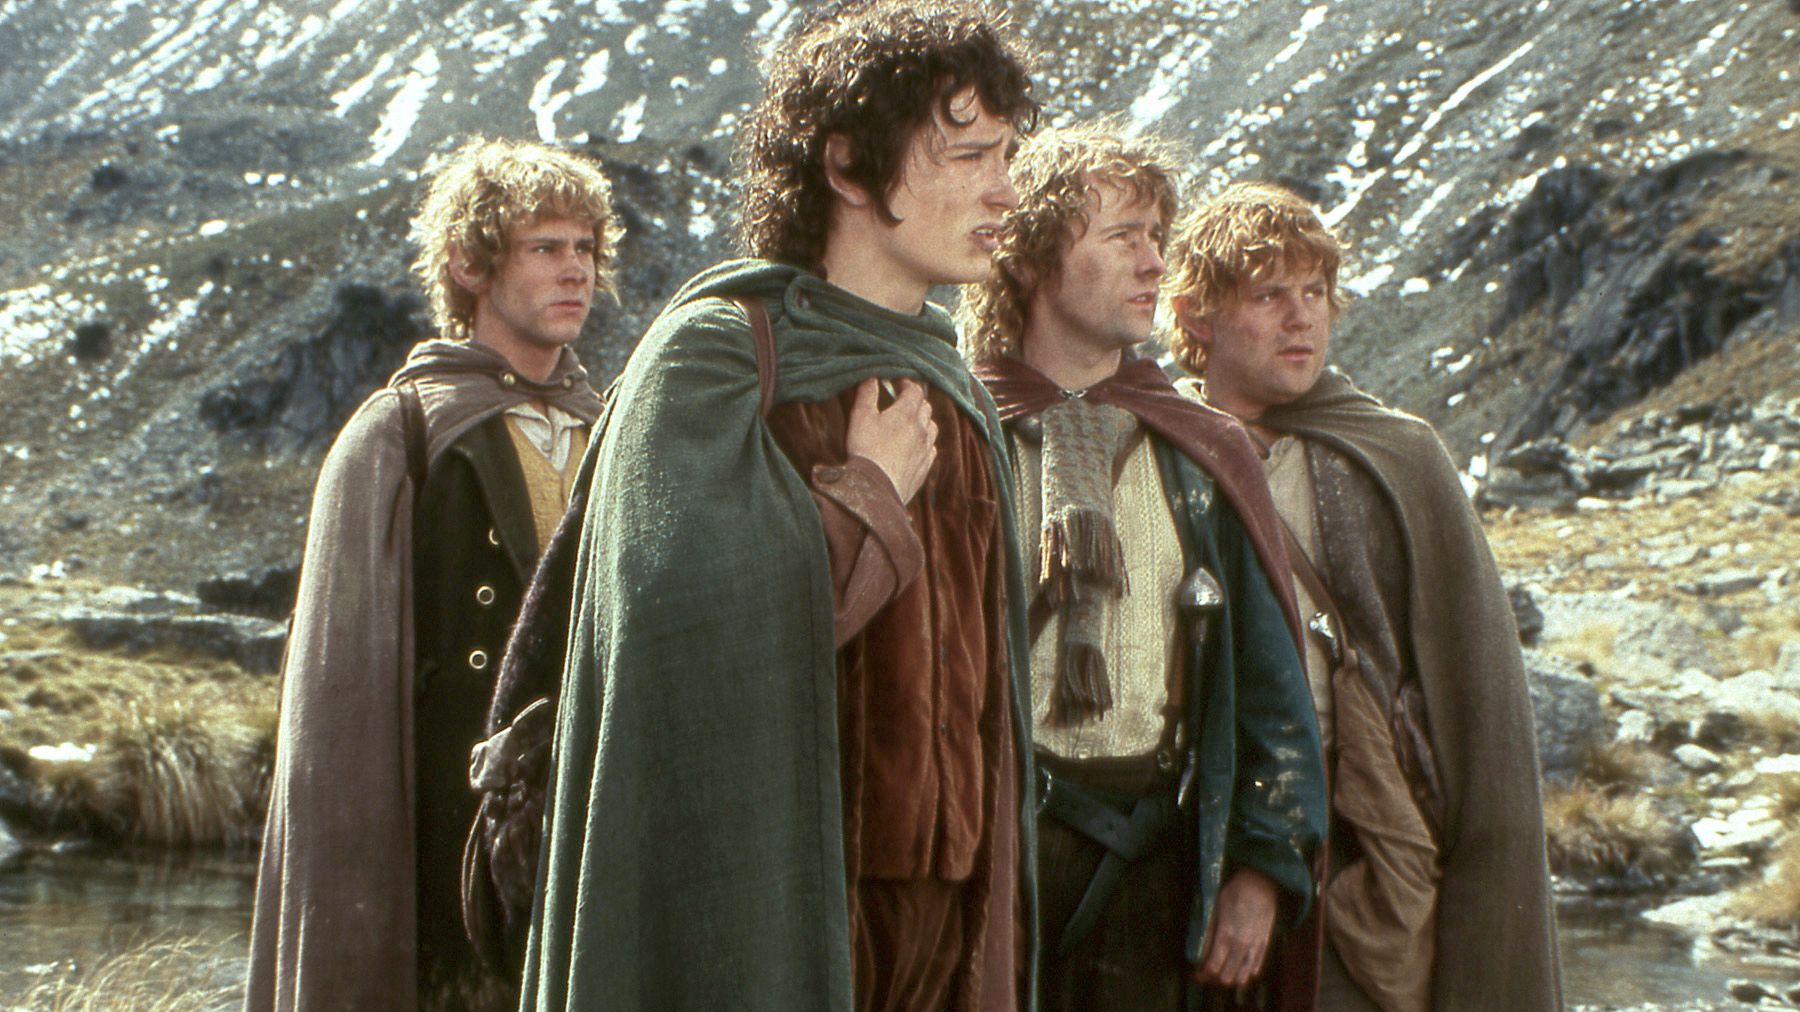 Lord of the Rings' Anime Feature Coming From New Line Cinema